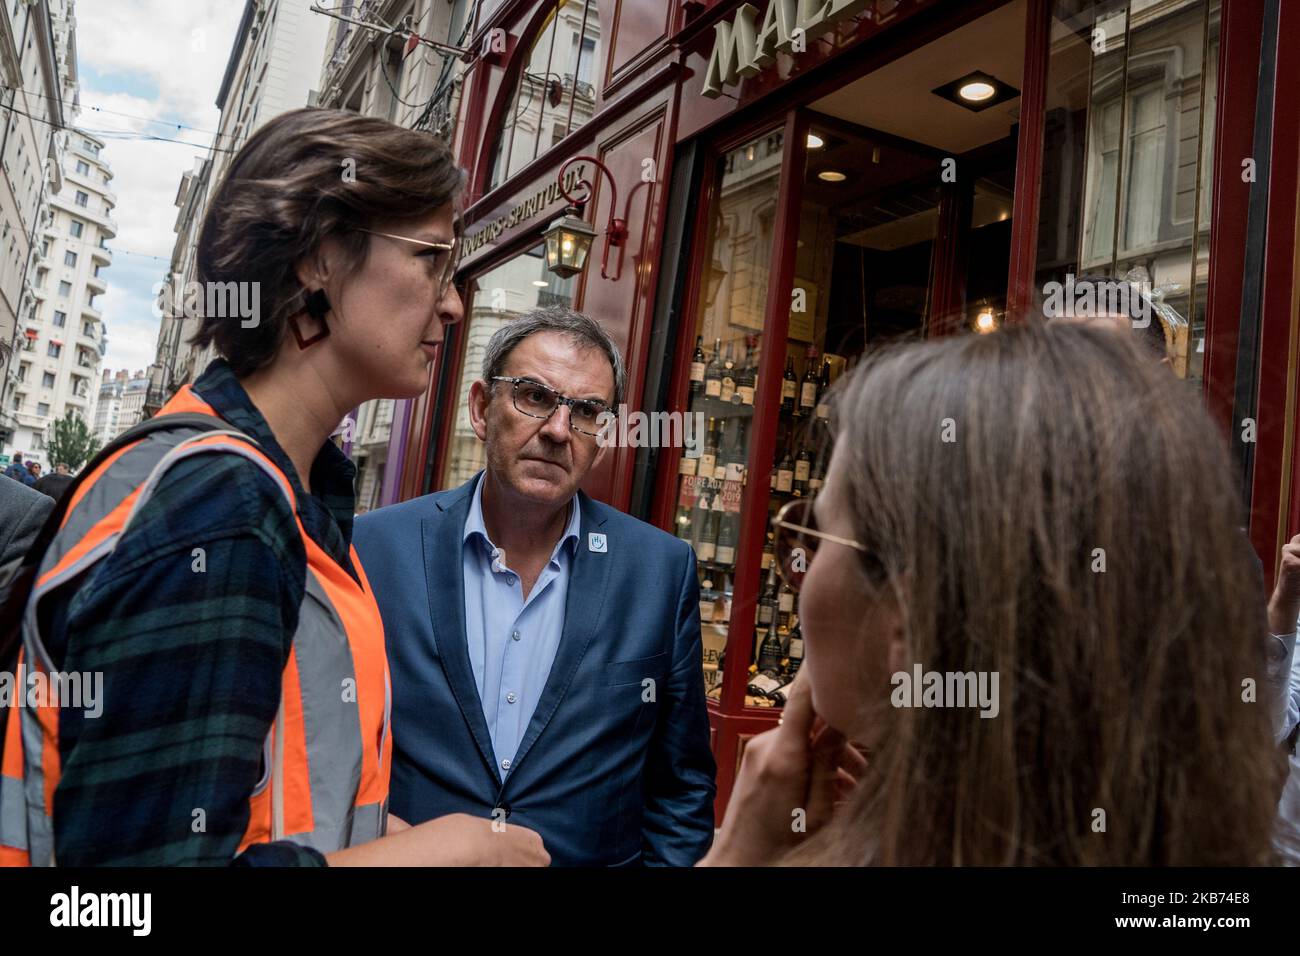 Walk of the President of the Lyon Metropolitan Area David Kimelfeld on the occasion of the first day of pedestrianisation testing in the city center of Lyon, France, on 28 September 2019. (Photo by Nicolas Liponne/NurPhoto) Stock Photo